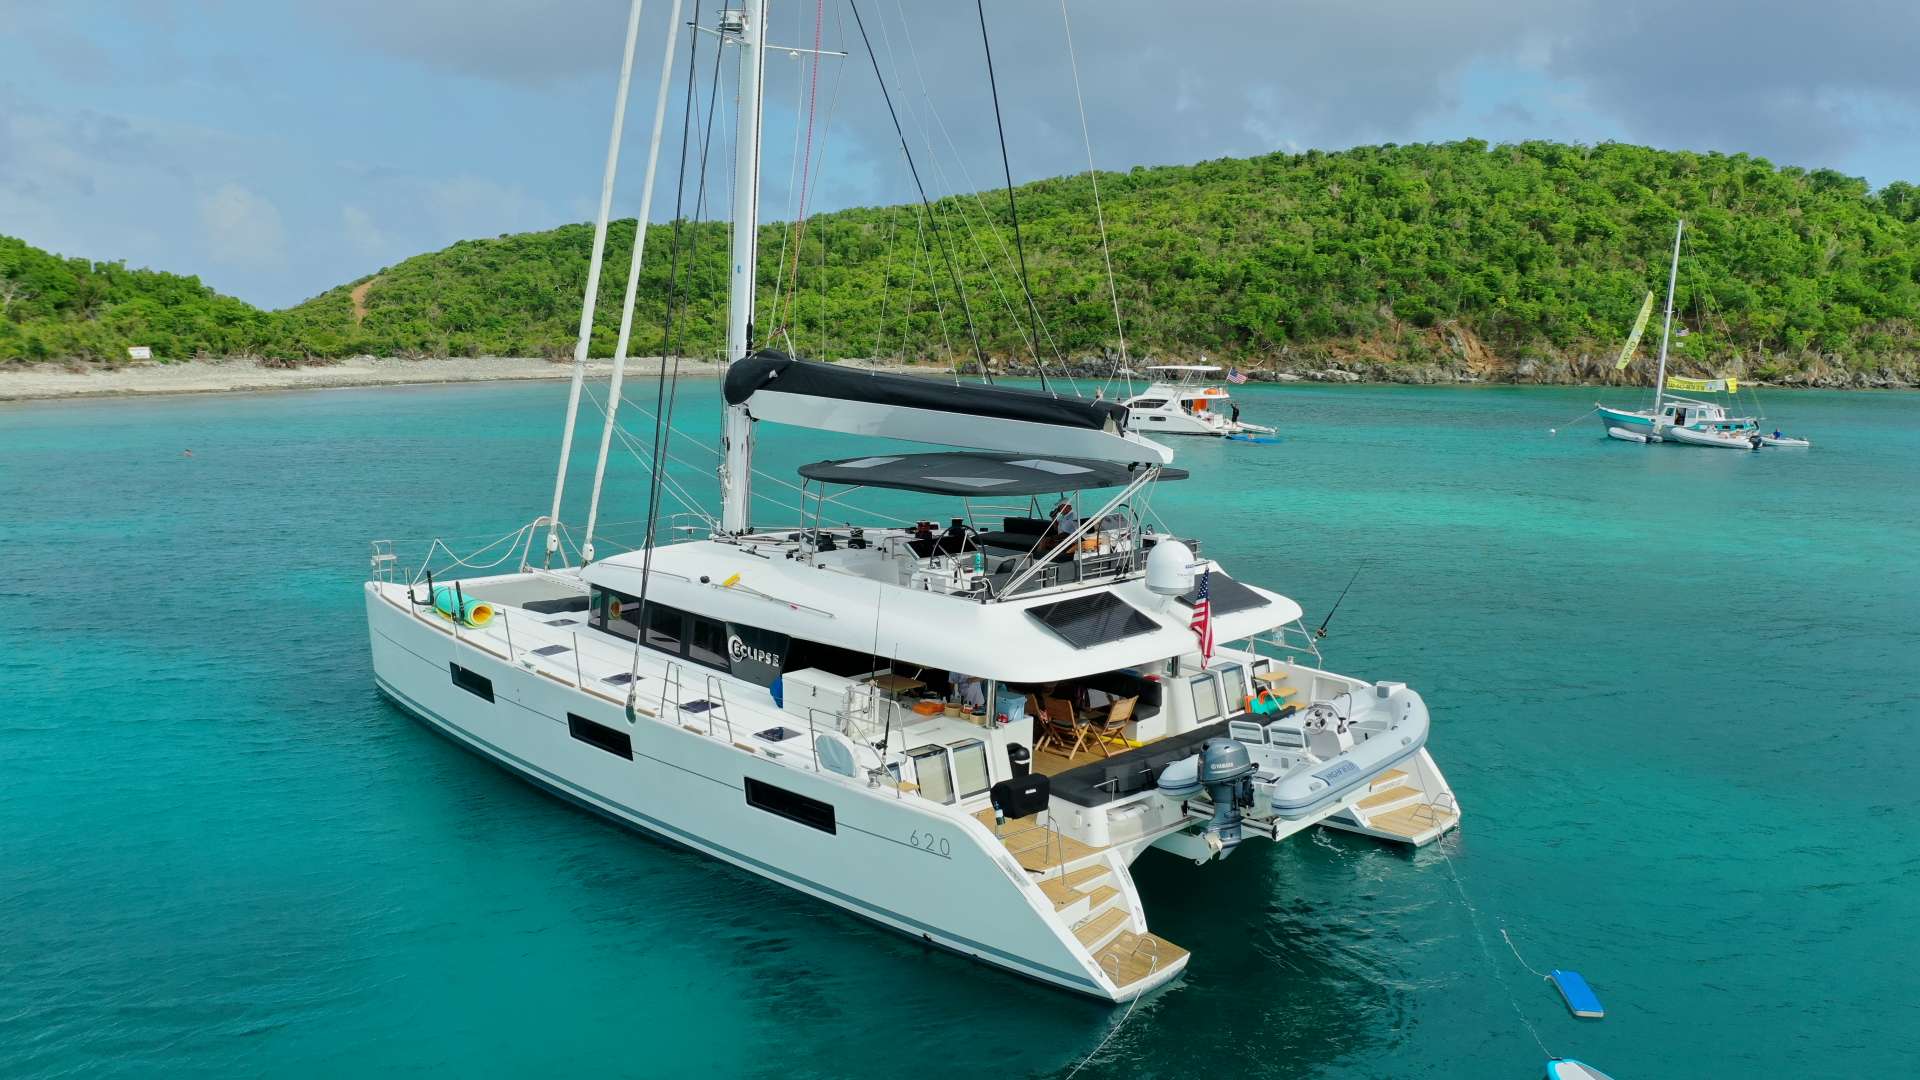 ECLIPSE is a brand new and beautiful 2017 model Lagoon 62 launched in October 2016. 

4 spacious Queen staterooms, lots of outside lounging areas, including the popular fly-bridge deck with 360 degree views. 